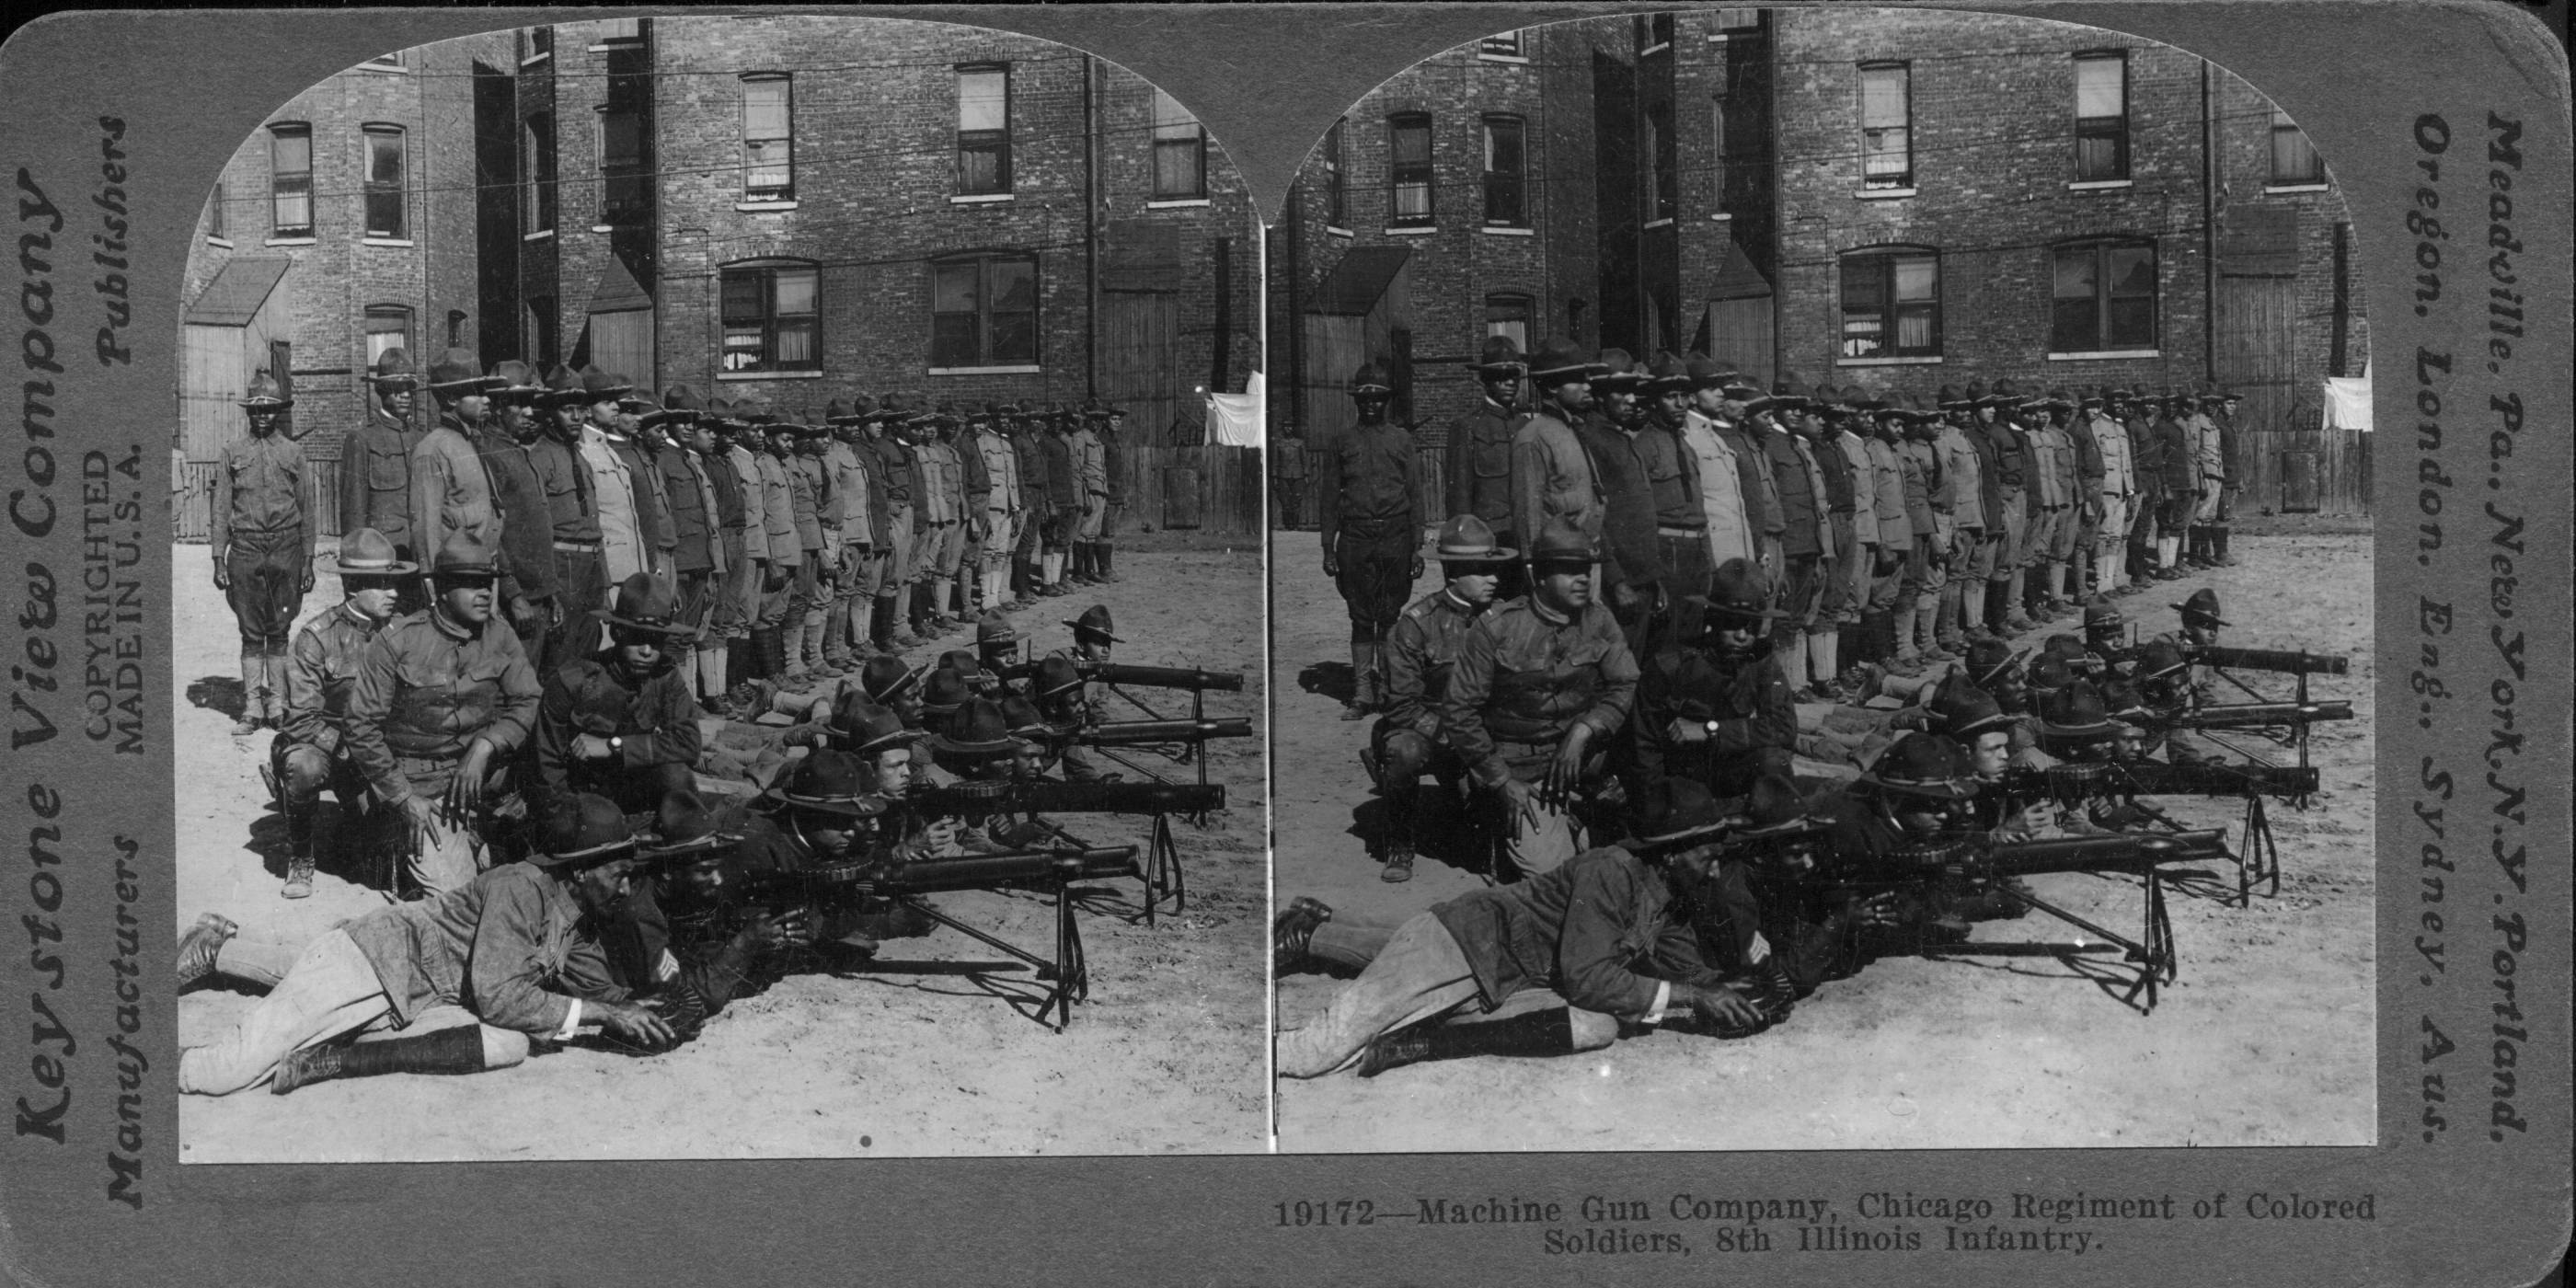 Machine Gun Company, Chicago Regiment of Colored Soldiers, 8th Illinois Infantry